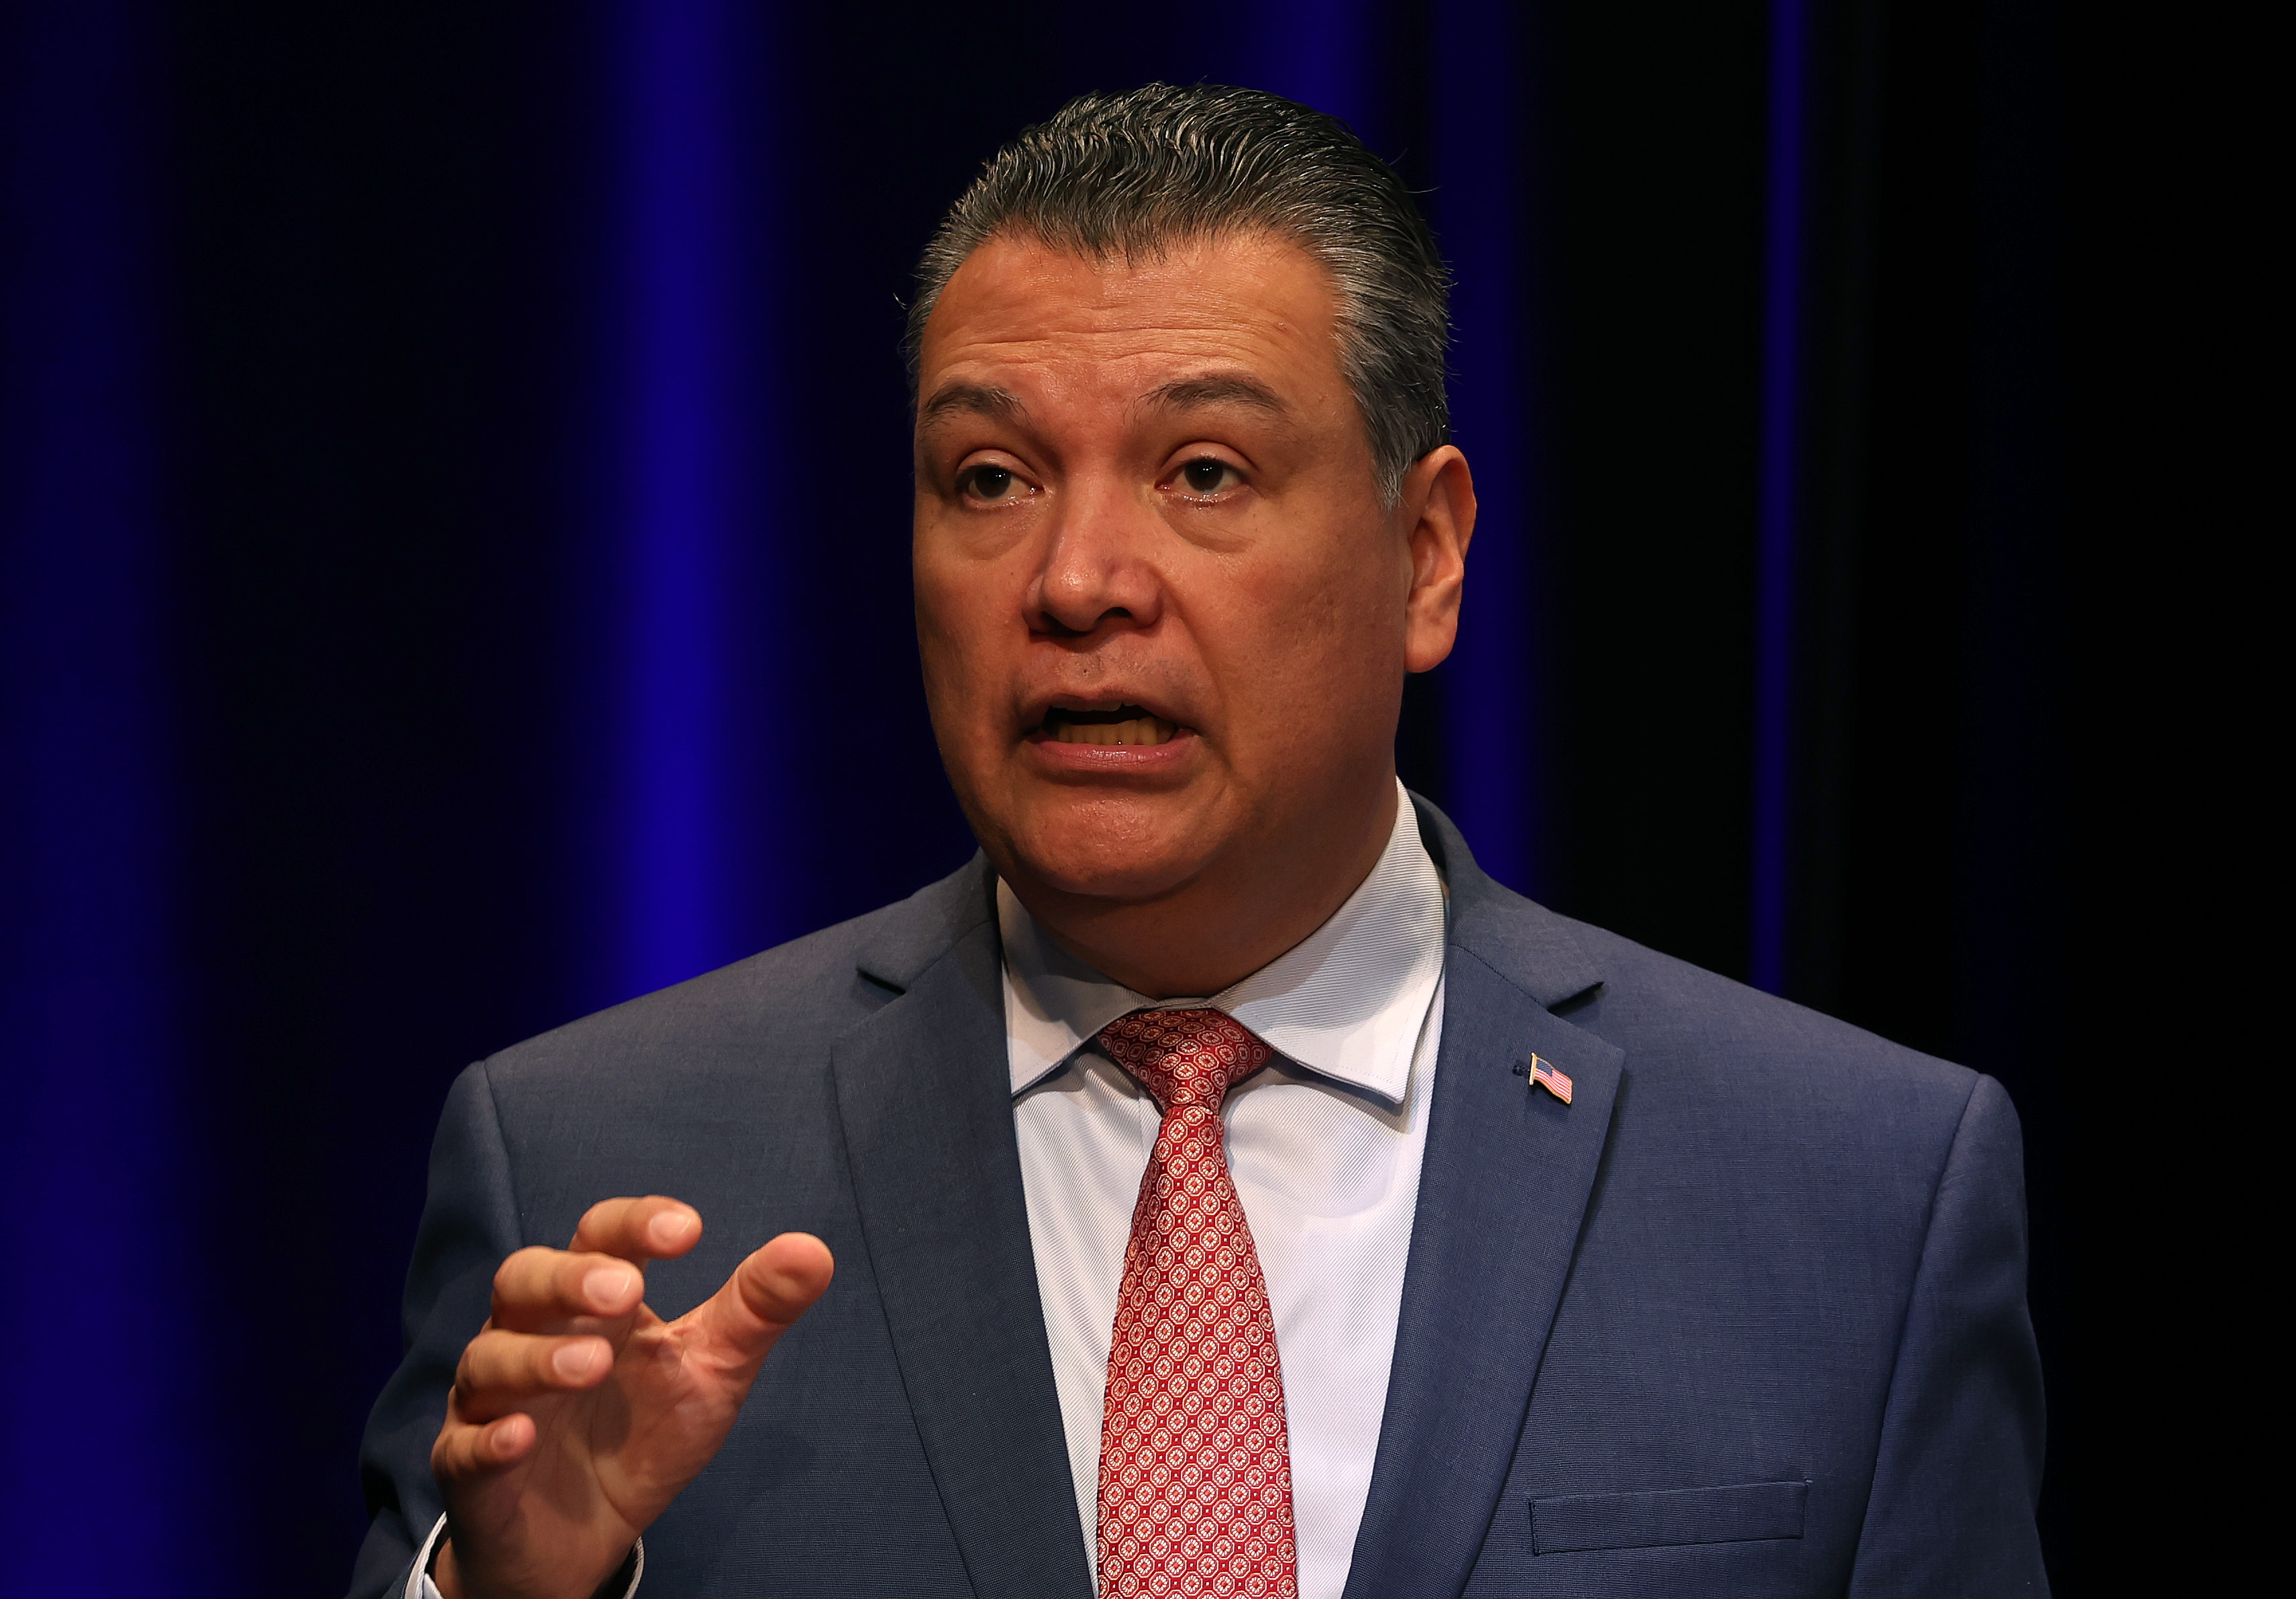 California Senator Alex Padilla on why he voted against the border security bill